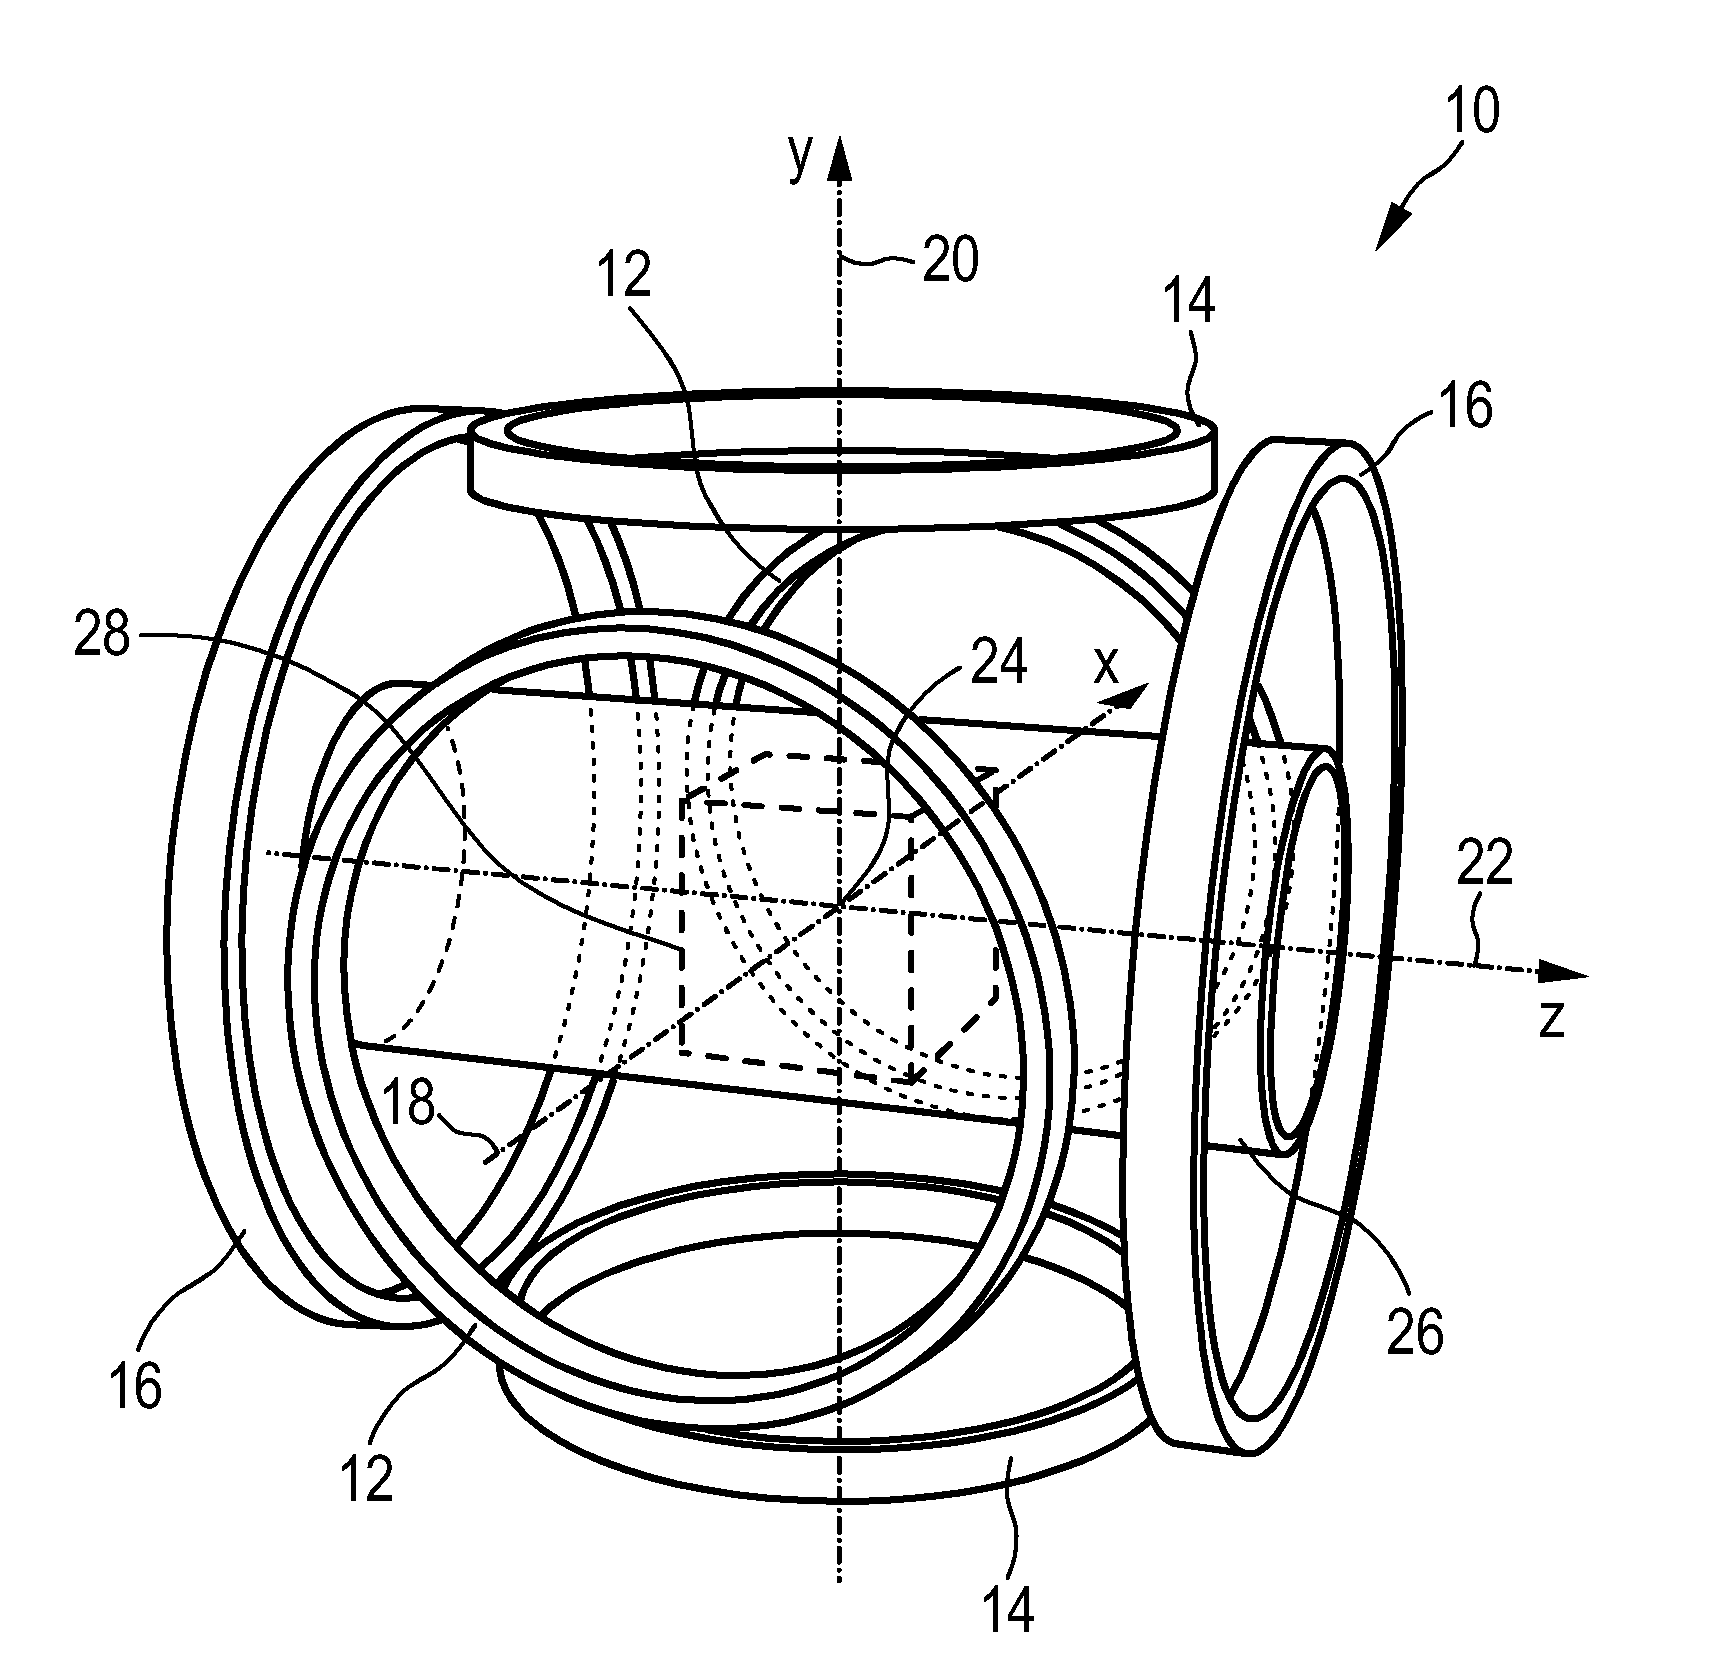 Apparatus and method for determining at least one electromagnetic quantity